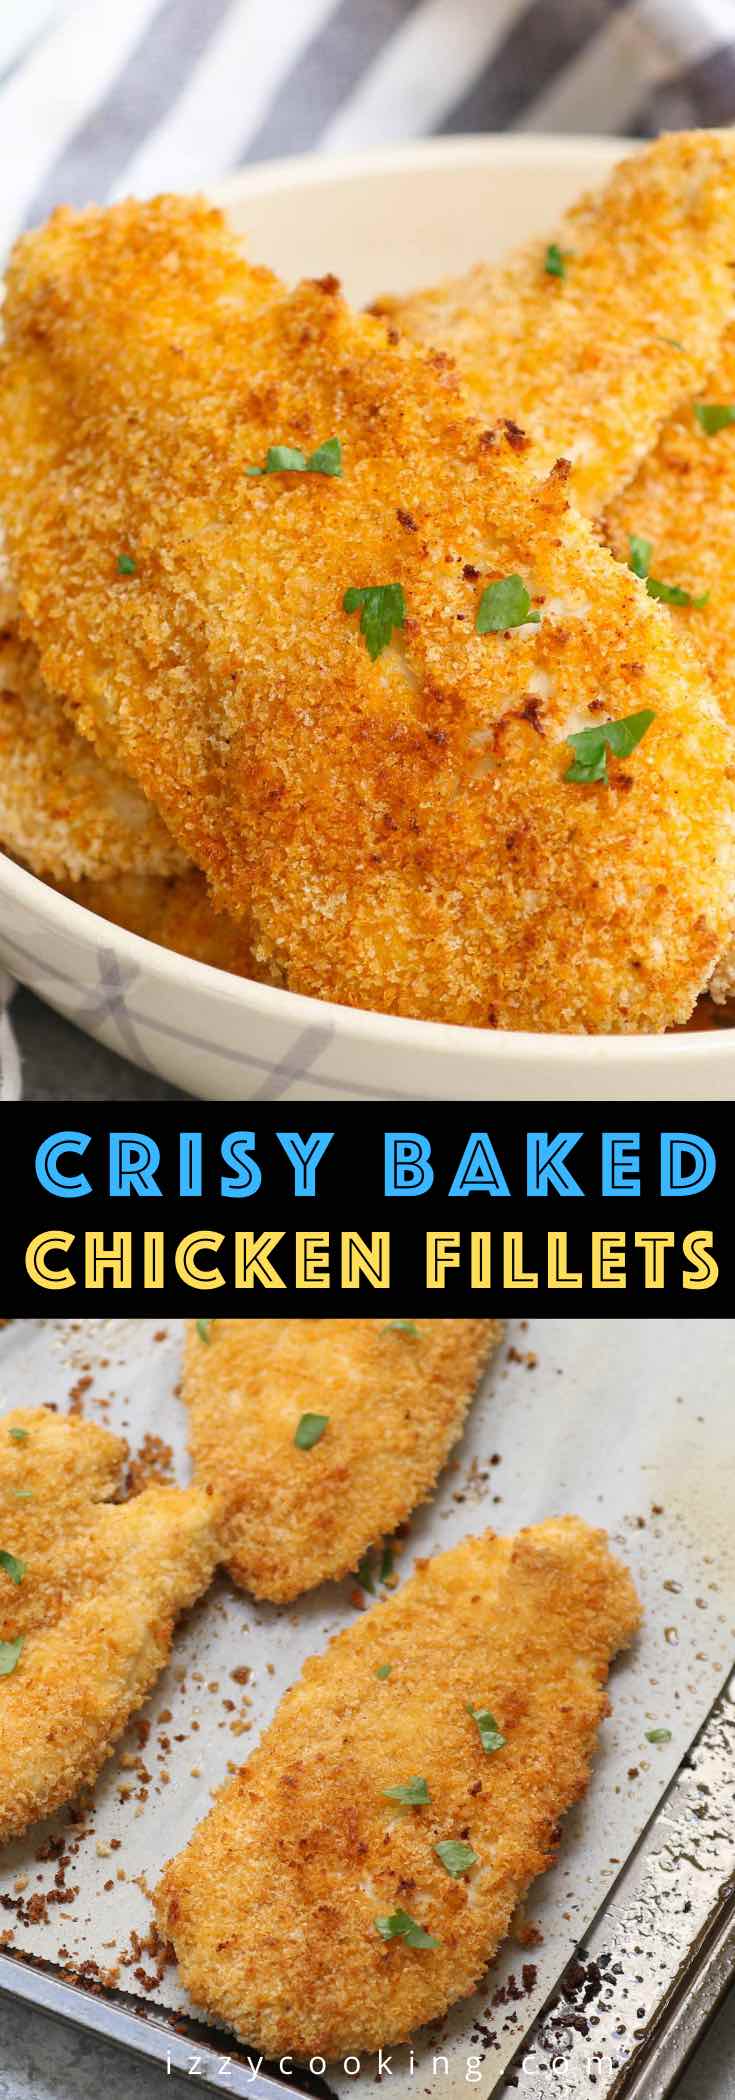 Crispy and crunchy Oven Baked Chicken Fillets are life-changing! Chicken breast fillets are soaked in lemon garlic flavors and then coated with a golden parmesan panko crumb.  No mess, no flour needed, no deep-frying! This restaurant-quality recipe is so easy to make and popular with kids and adults!